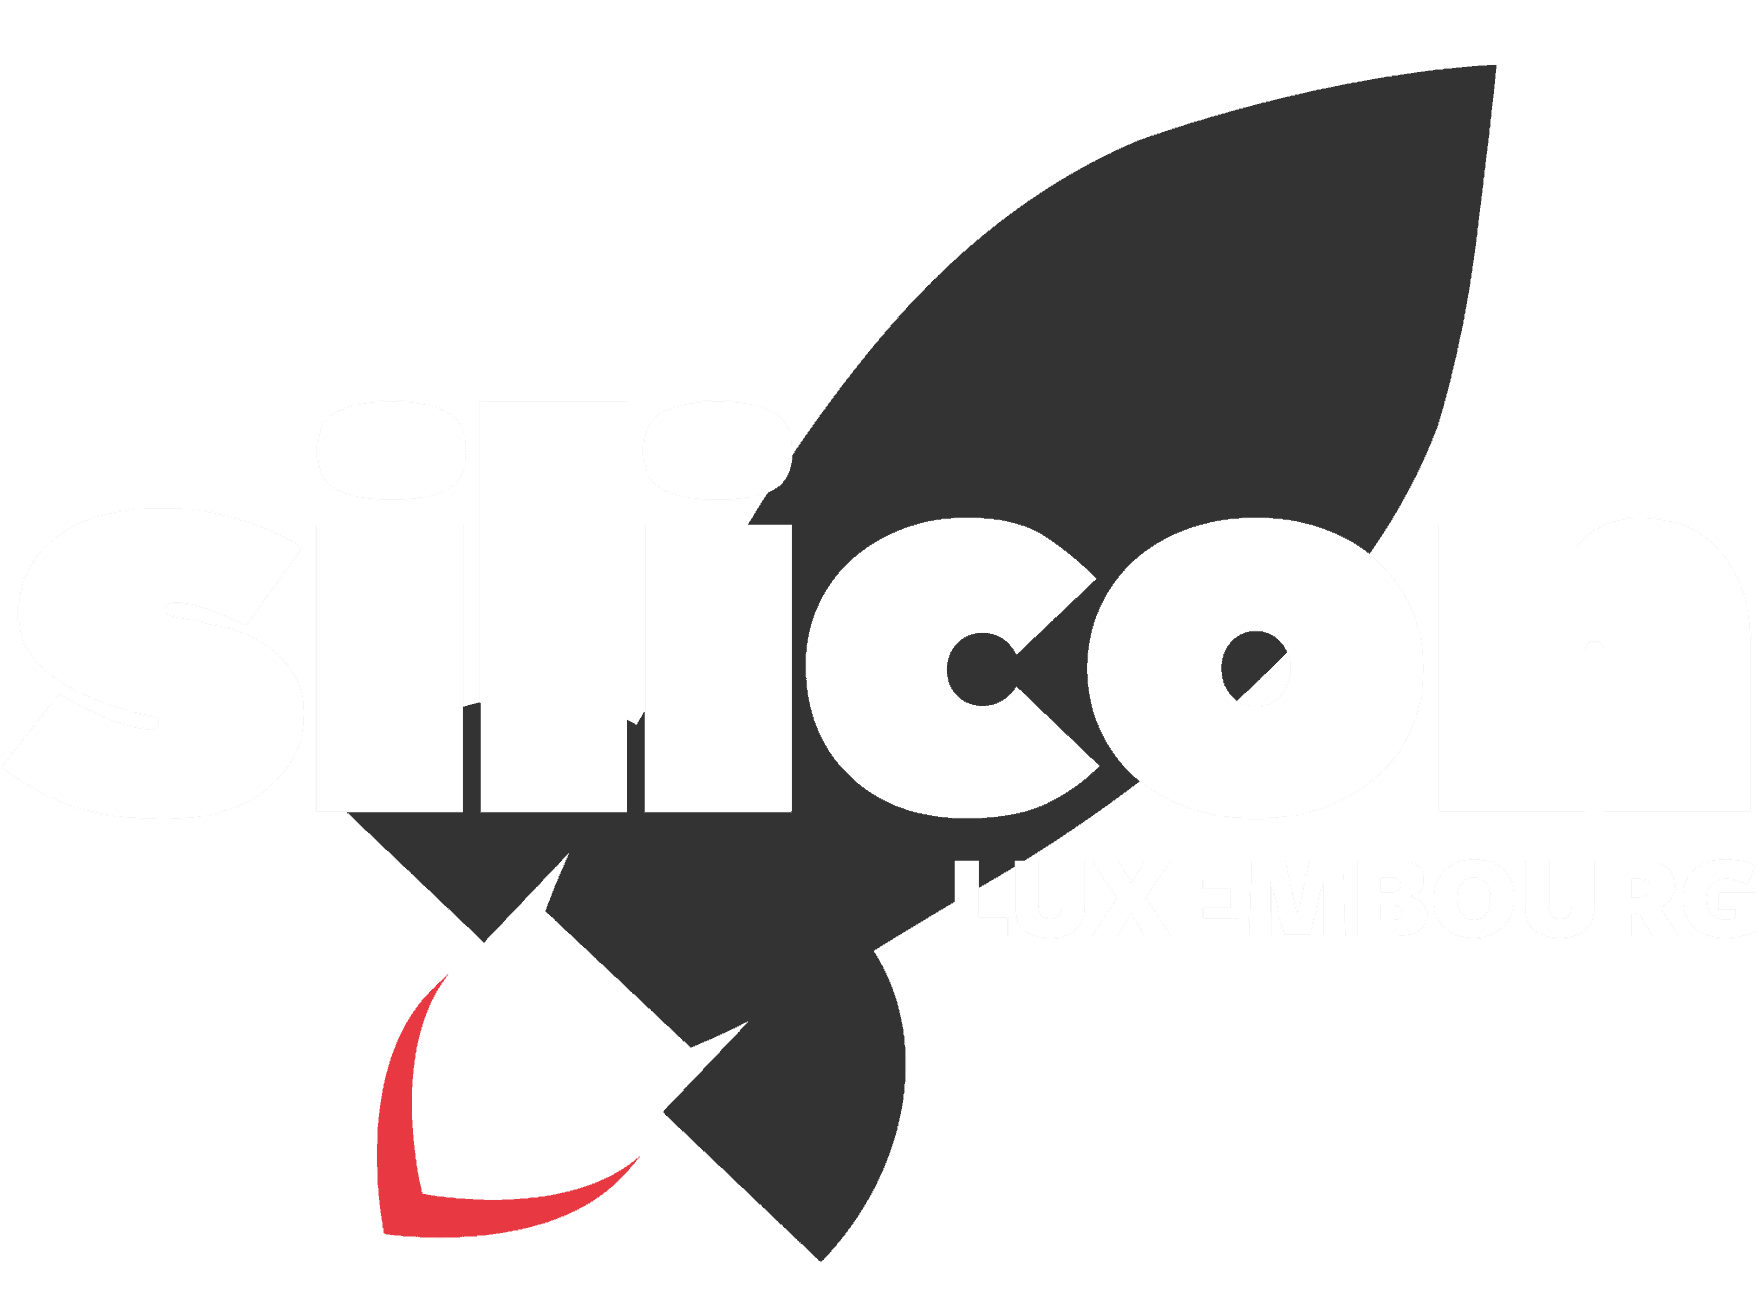 Silicon Luxembourg